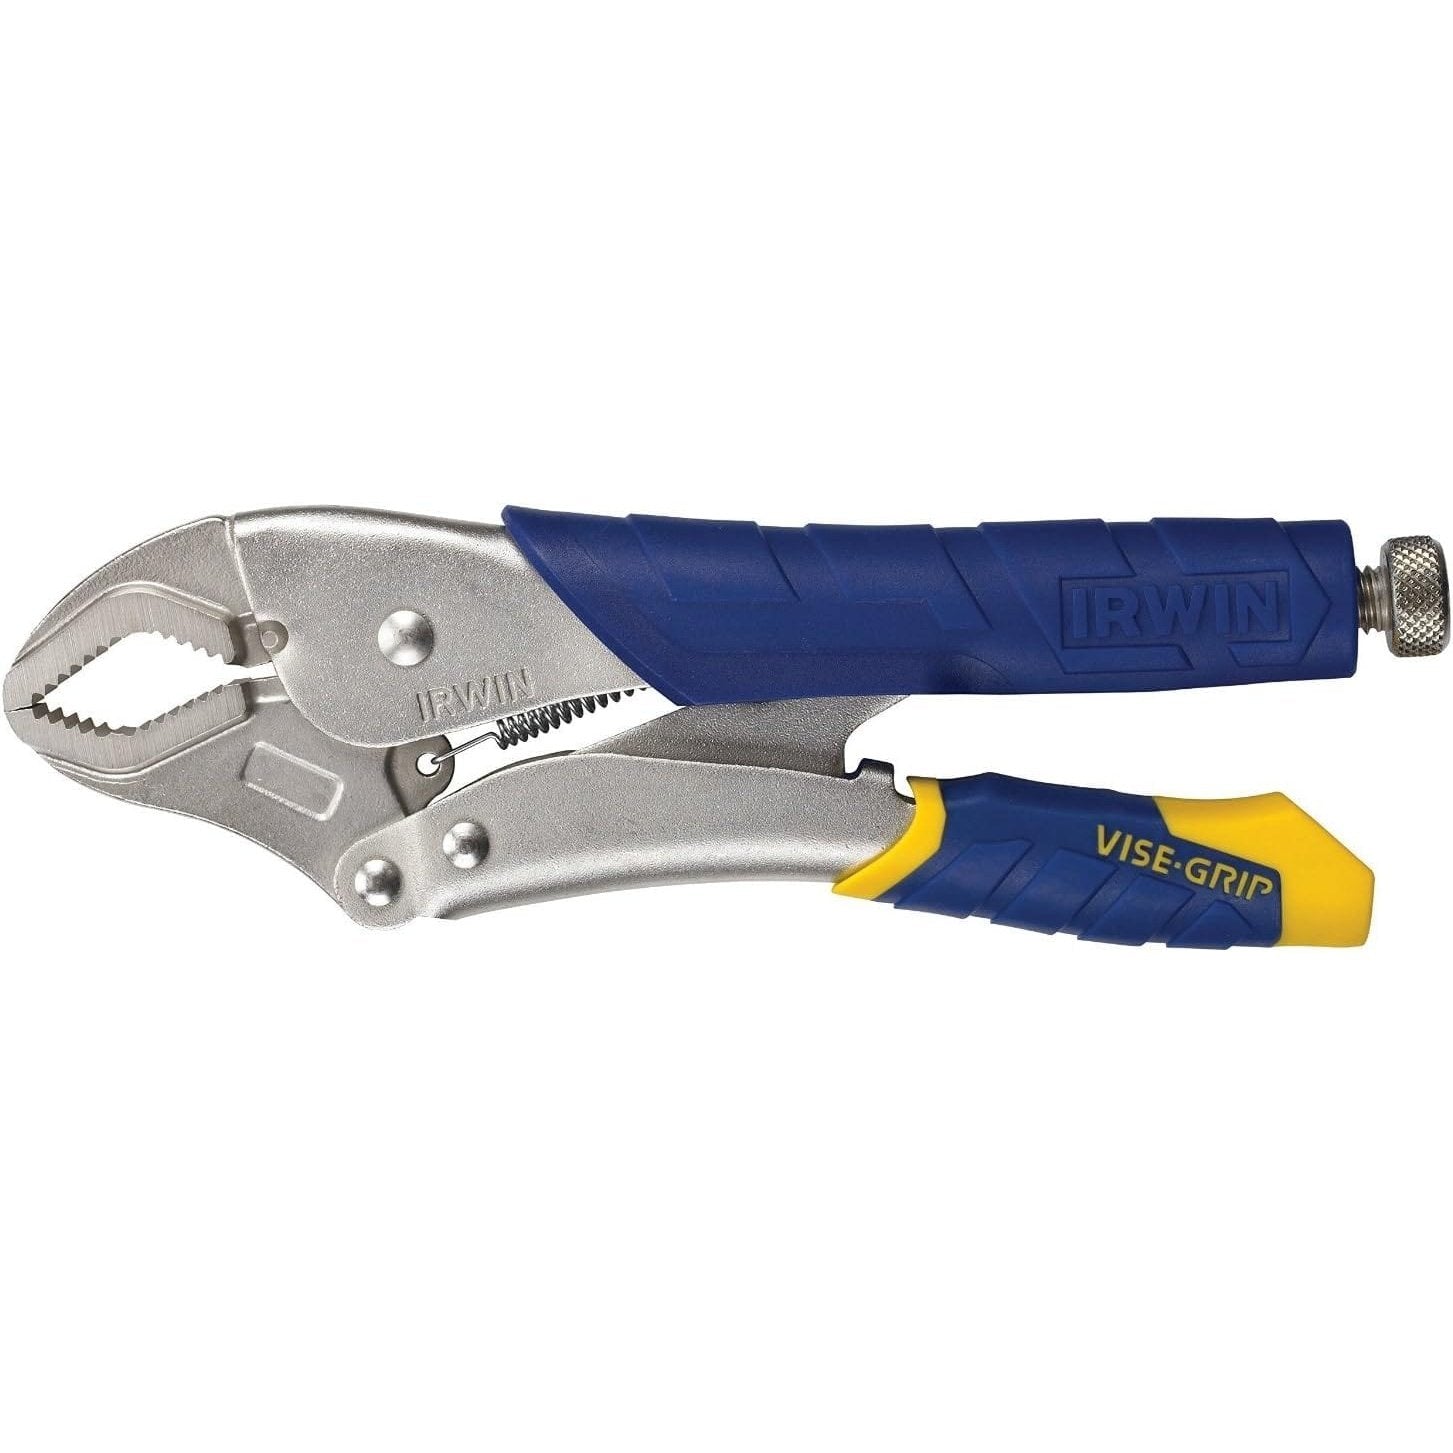 Total Curved Jaw Locking Plier 10'' - THT191003 | Supply Master Accra, Ghana Pliers Buy Tools hardware Building materials